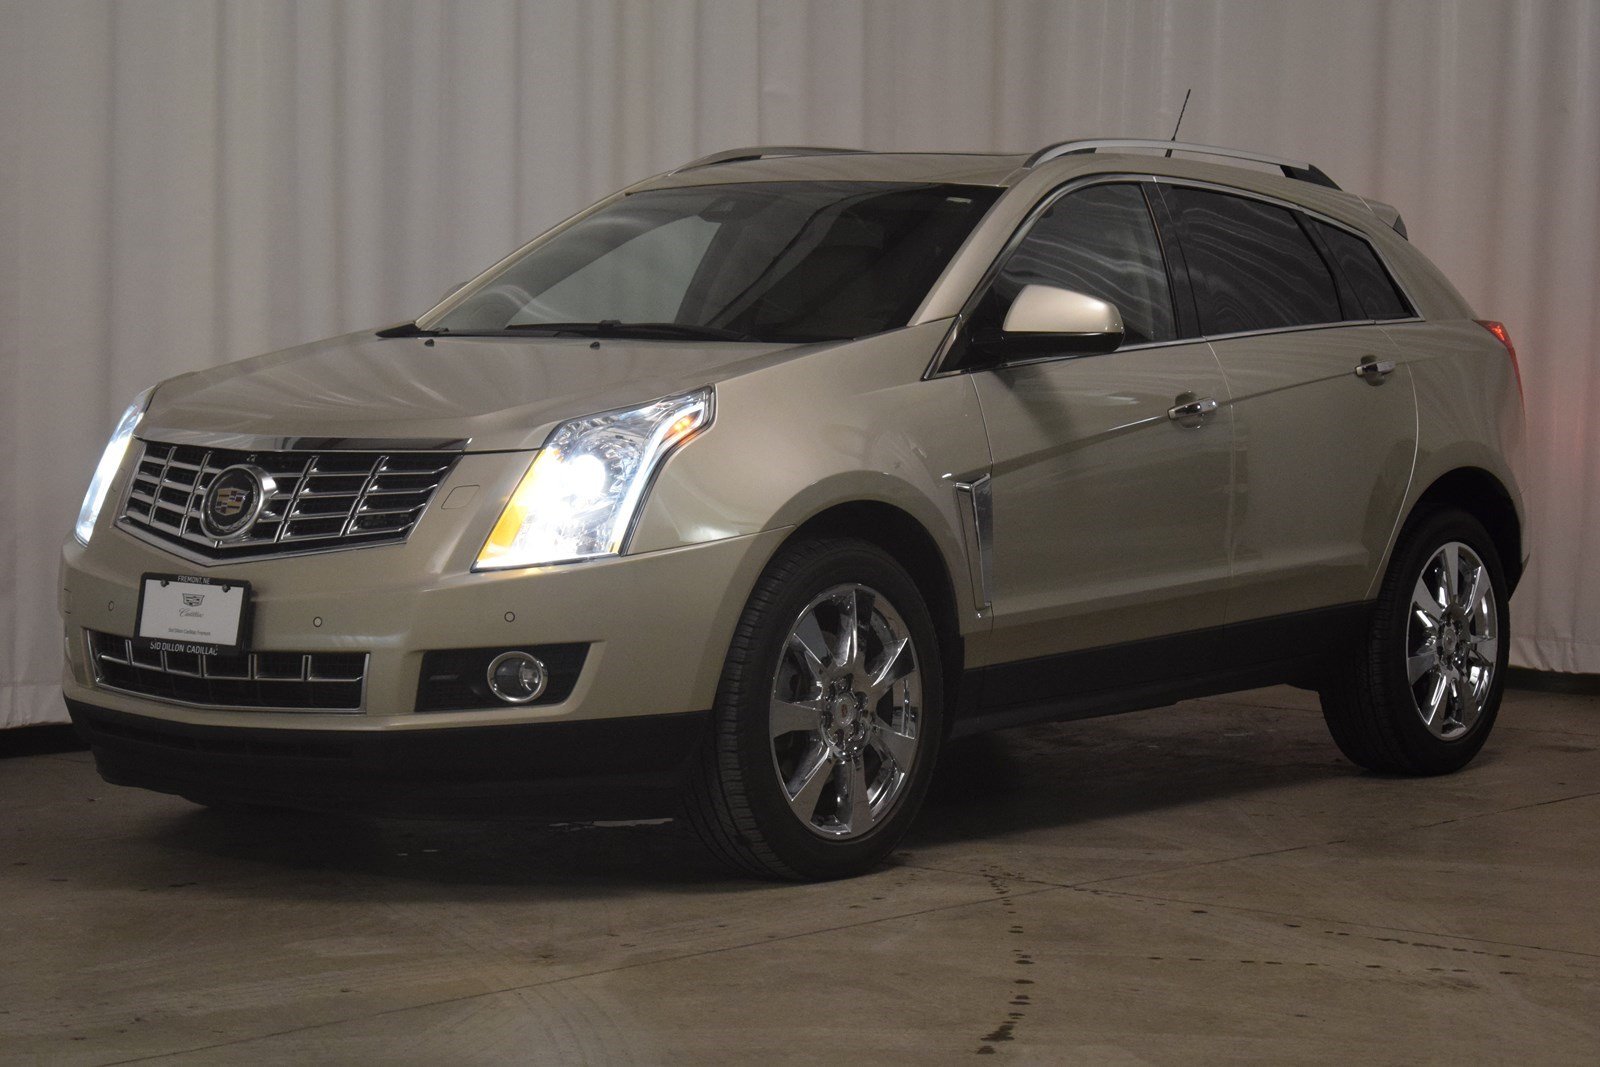 Pre-Owned 2013 Cadillac SRX Premium Collection SUV in Fremont #2U15391